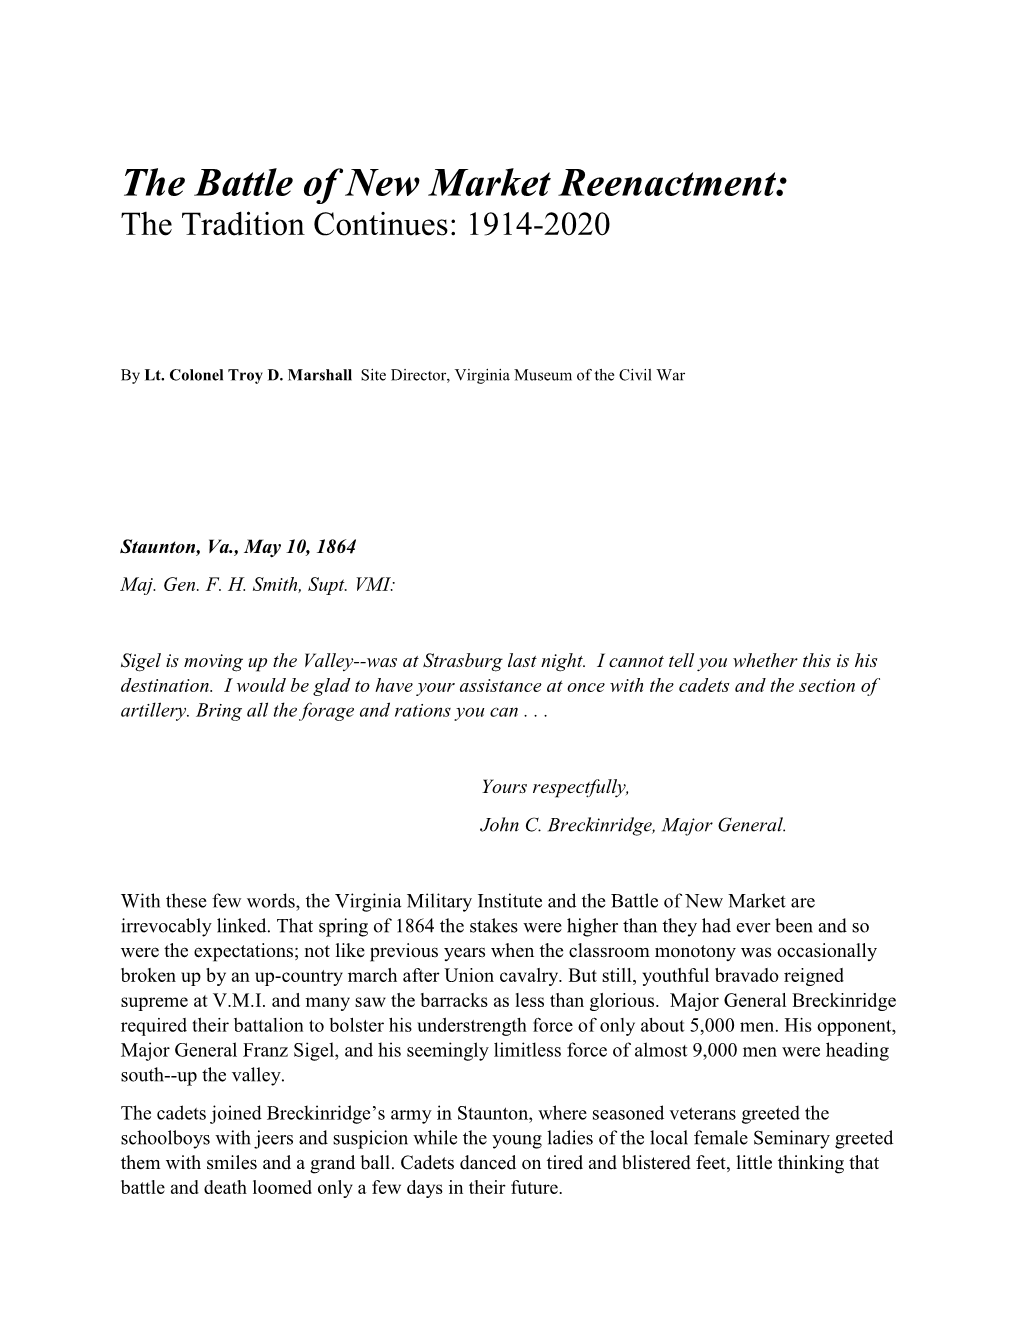 The Battle of New Market Reenactment: the Tradition Continues: 1914-2020